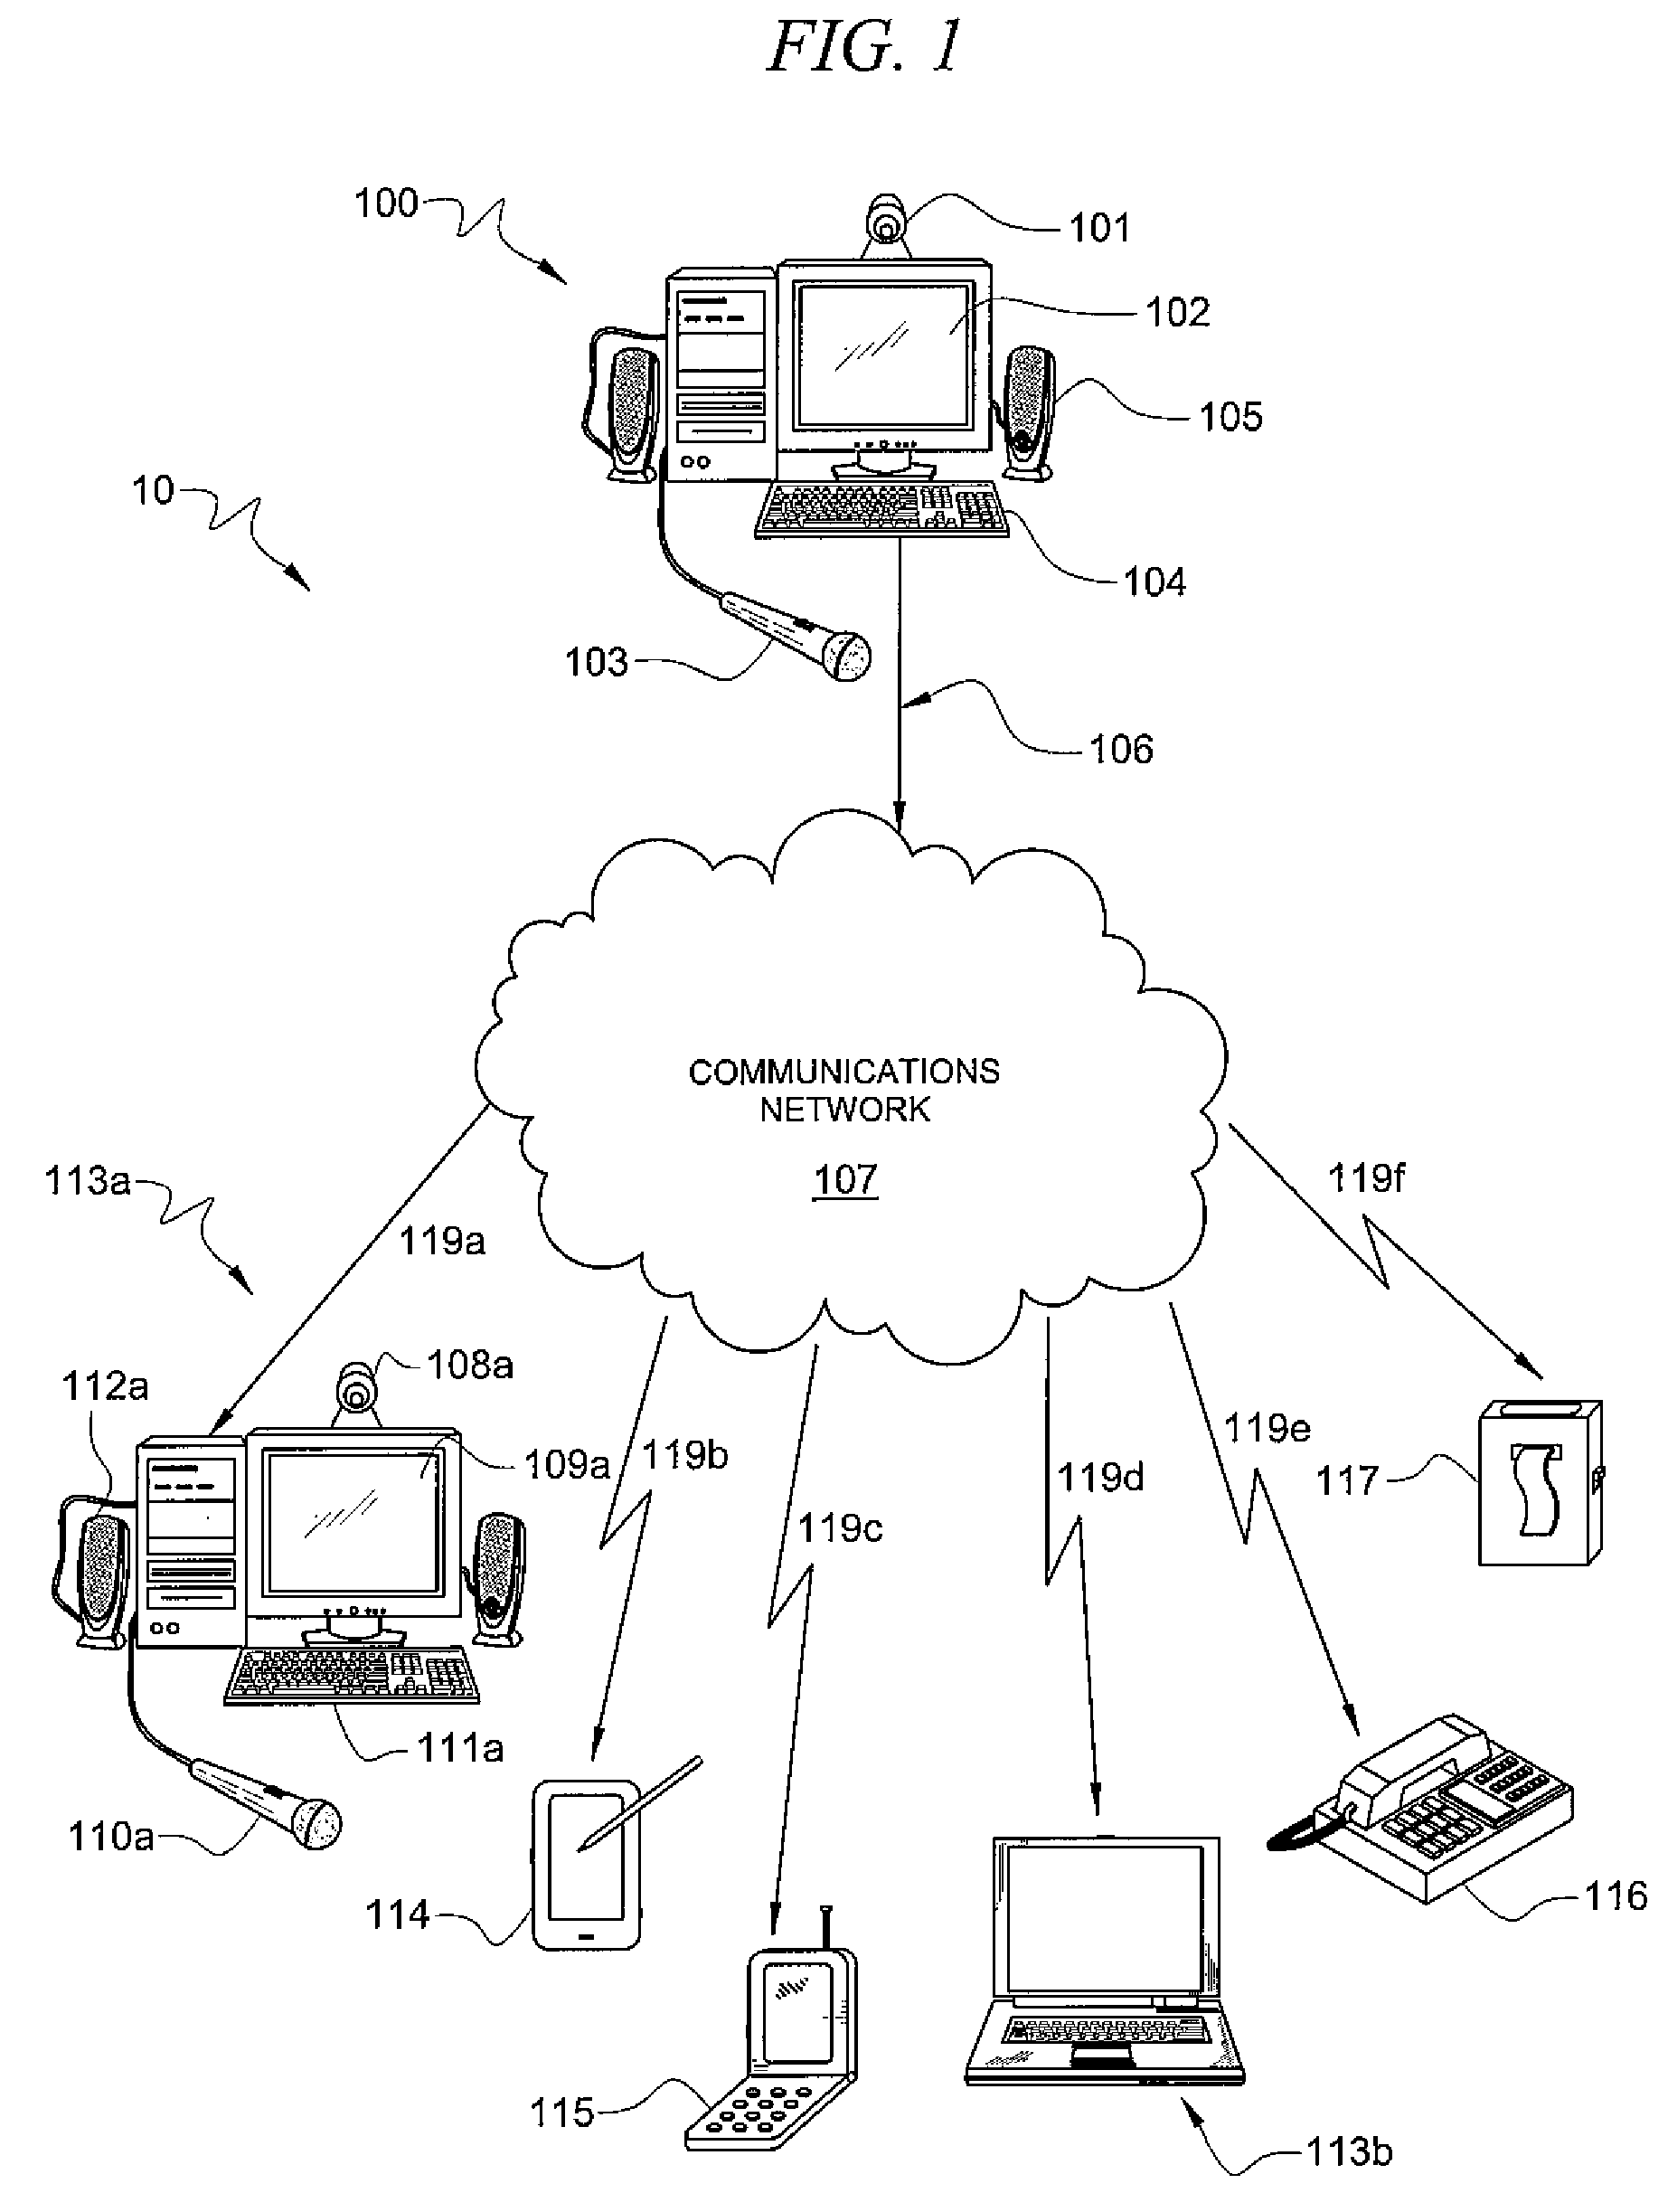 Instant electronic meeting from within a current computer application